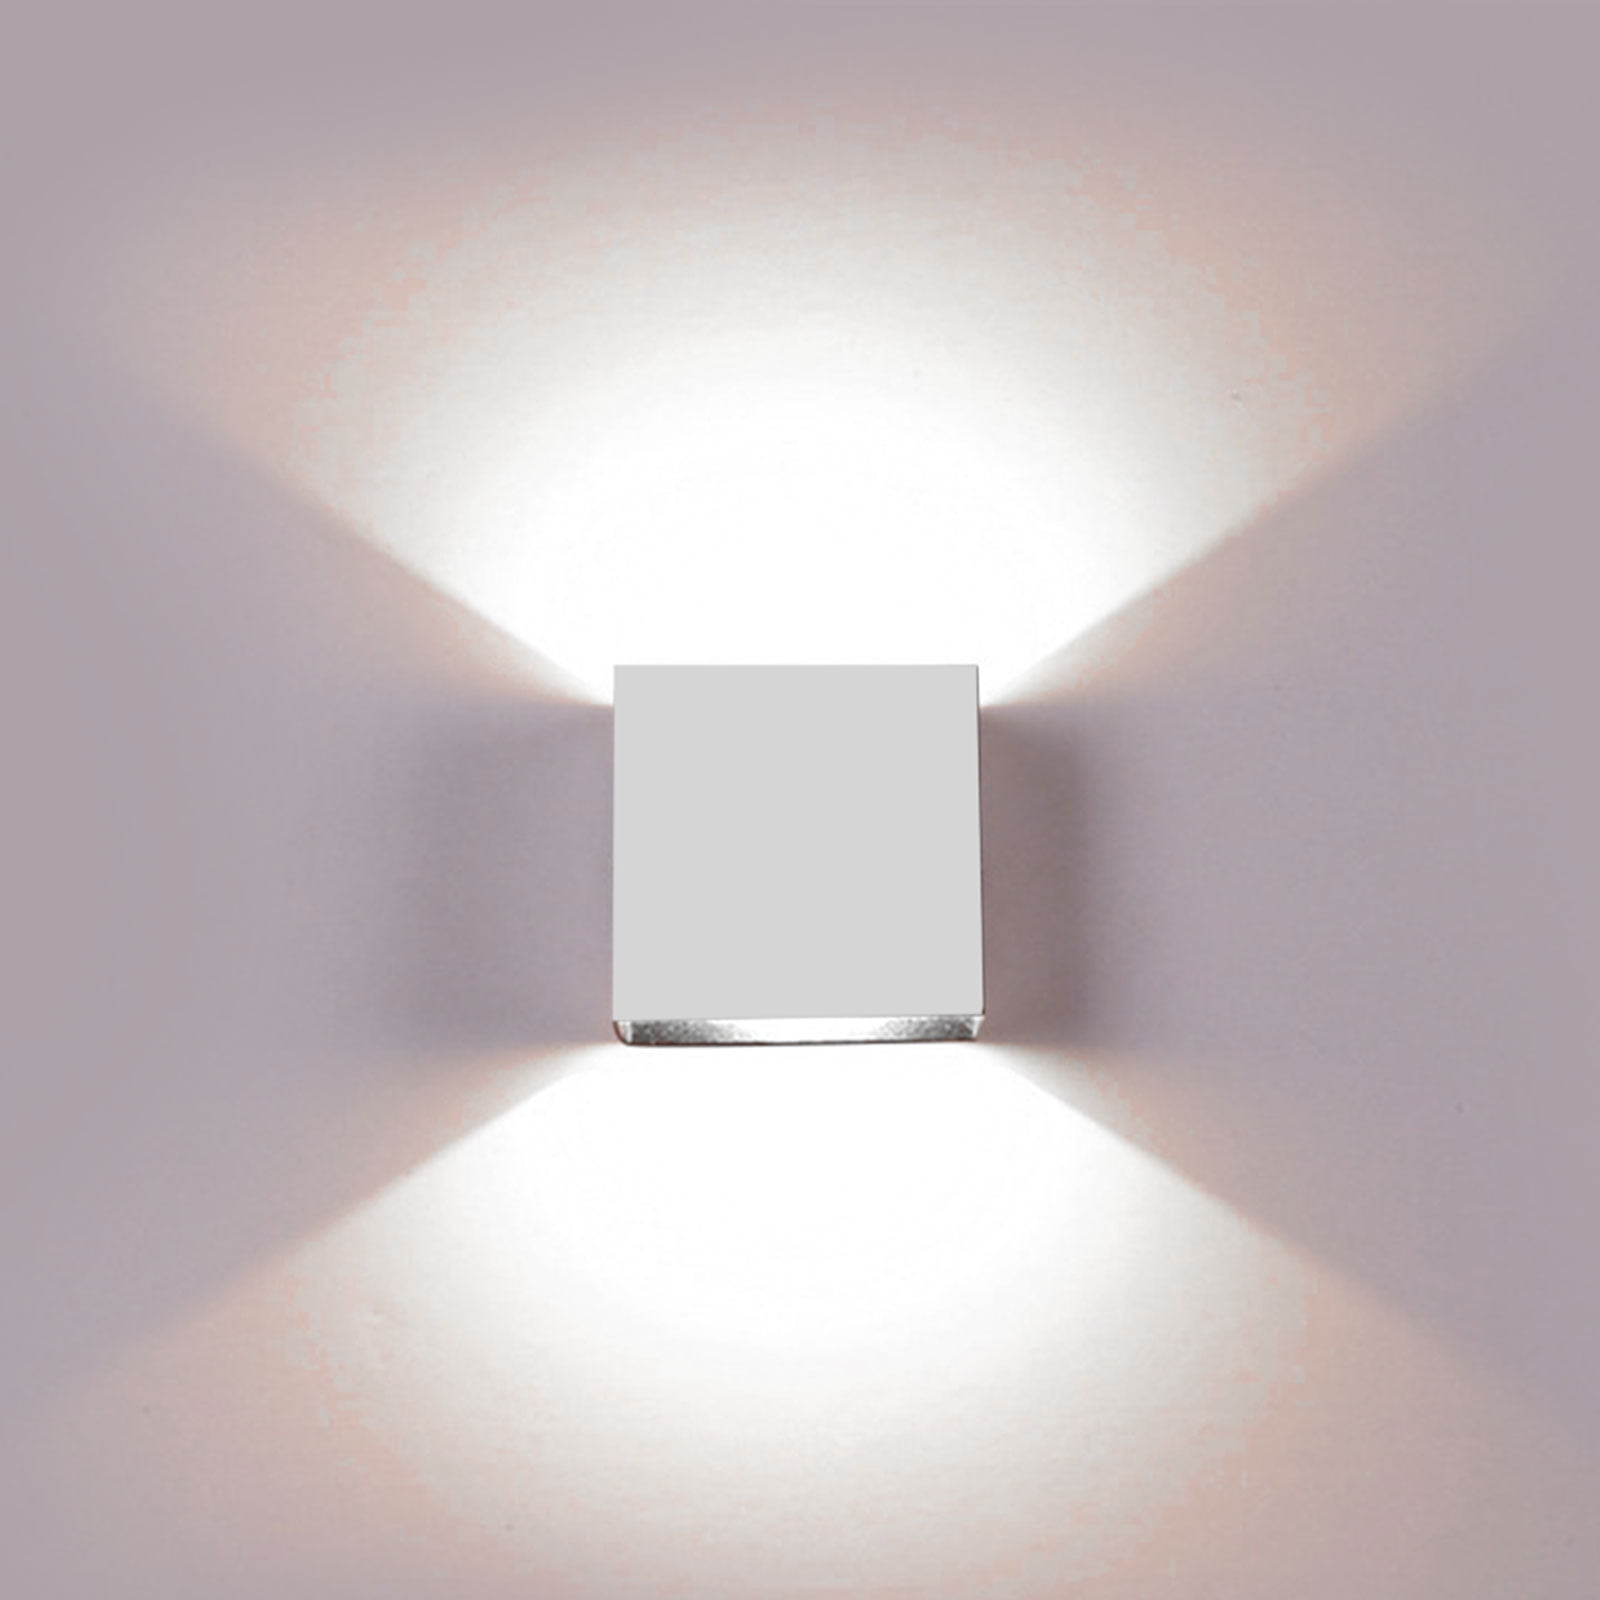 6W Modern COB LED Wall Light Up Down Cube Indoor Sconce Lighting Fixture Lamp 